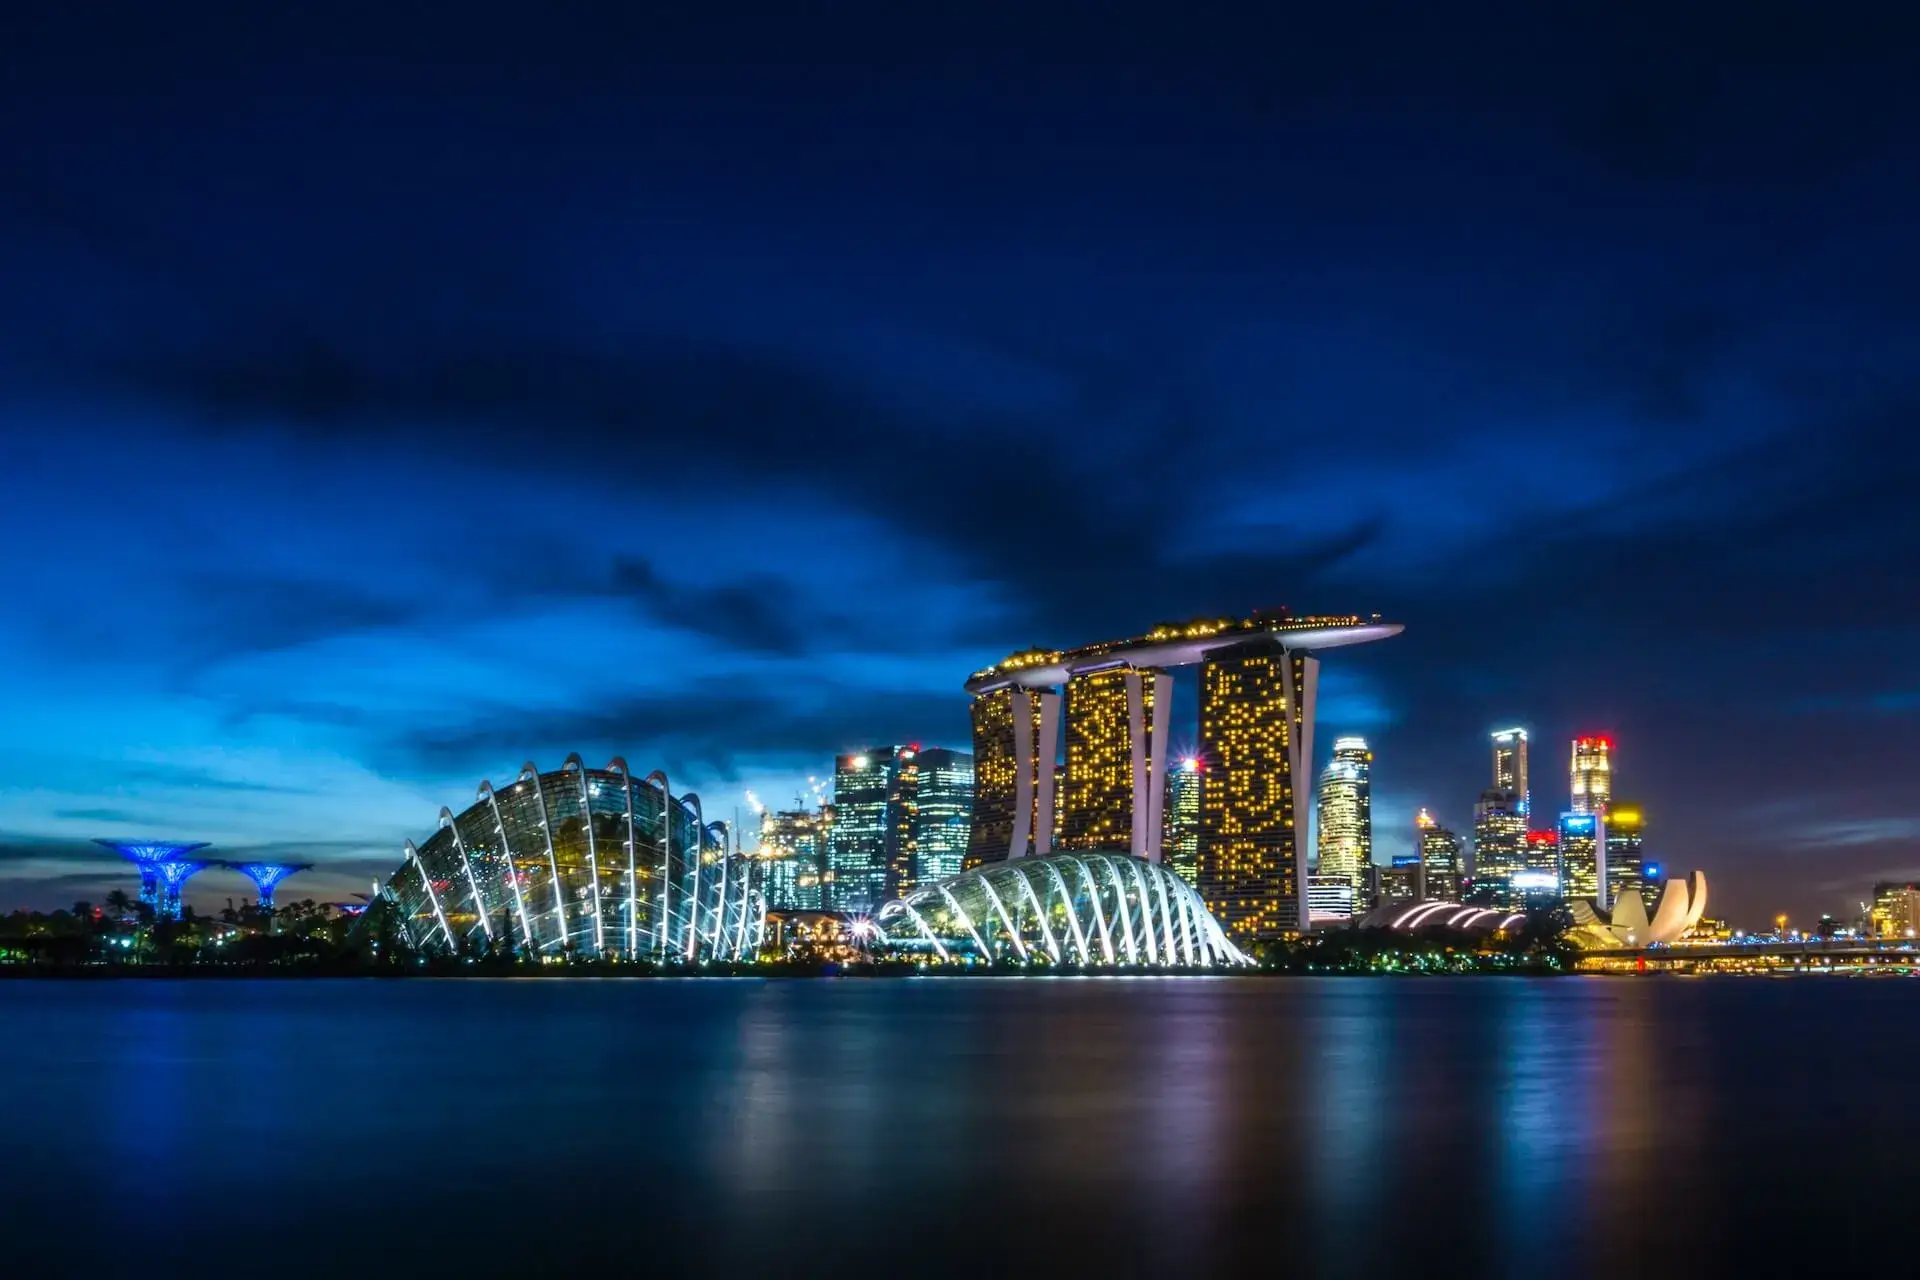 Singapore's 8 Must-See Sights for First-Time Travelers